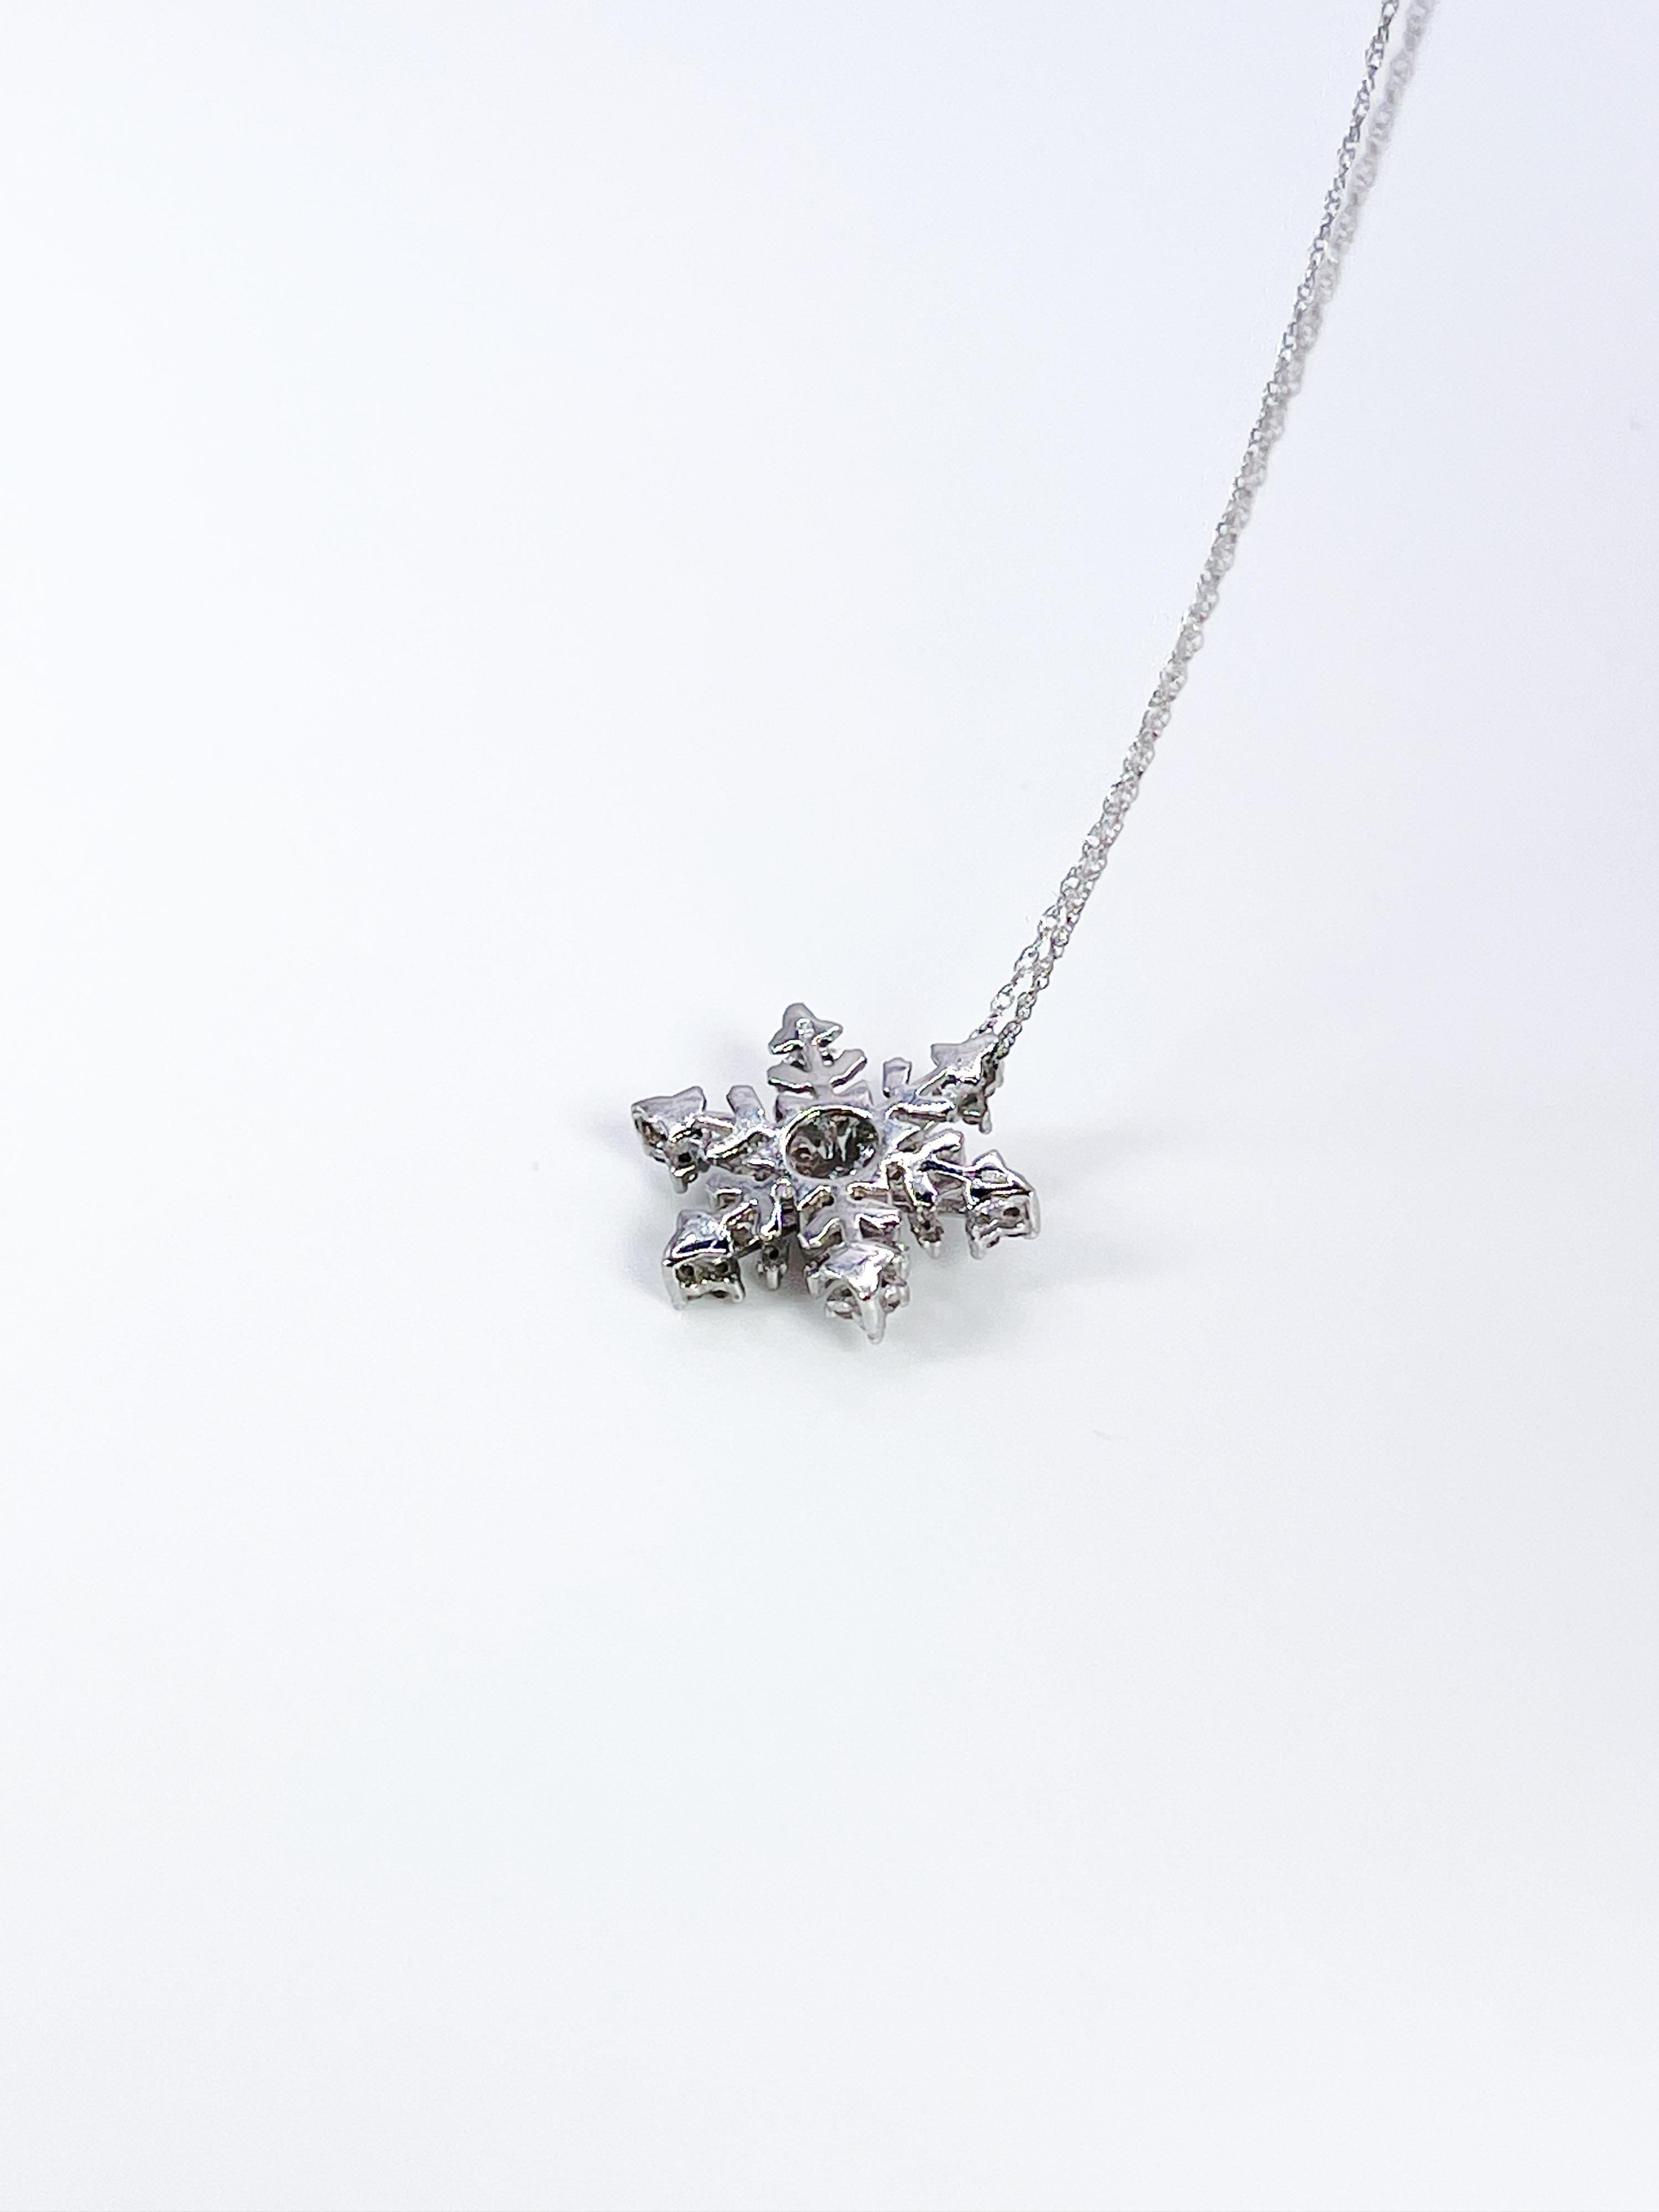 Snowflake diamond pendant necklace in 10KT white gold, chain is 18 inches.

GRAM WEIGHT: 1.77gr
GOLD: 10KT white gold

NATURAL DIAMOND(S)
Cut: Round, Baguette
Color: I (average)
Clarity: SI-I (averge)
Carat: 0.40ct
NECKLACE IS 18 INCHES LONG

WHAT